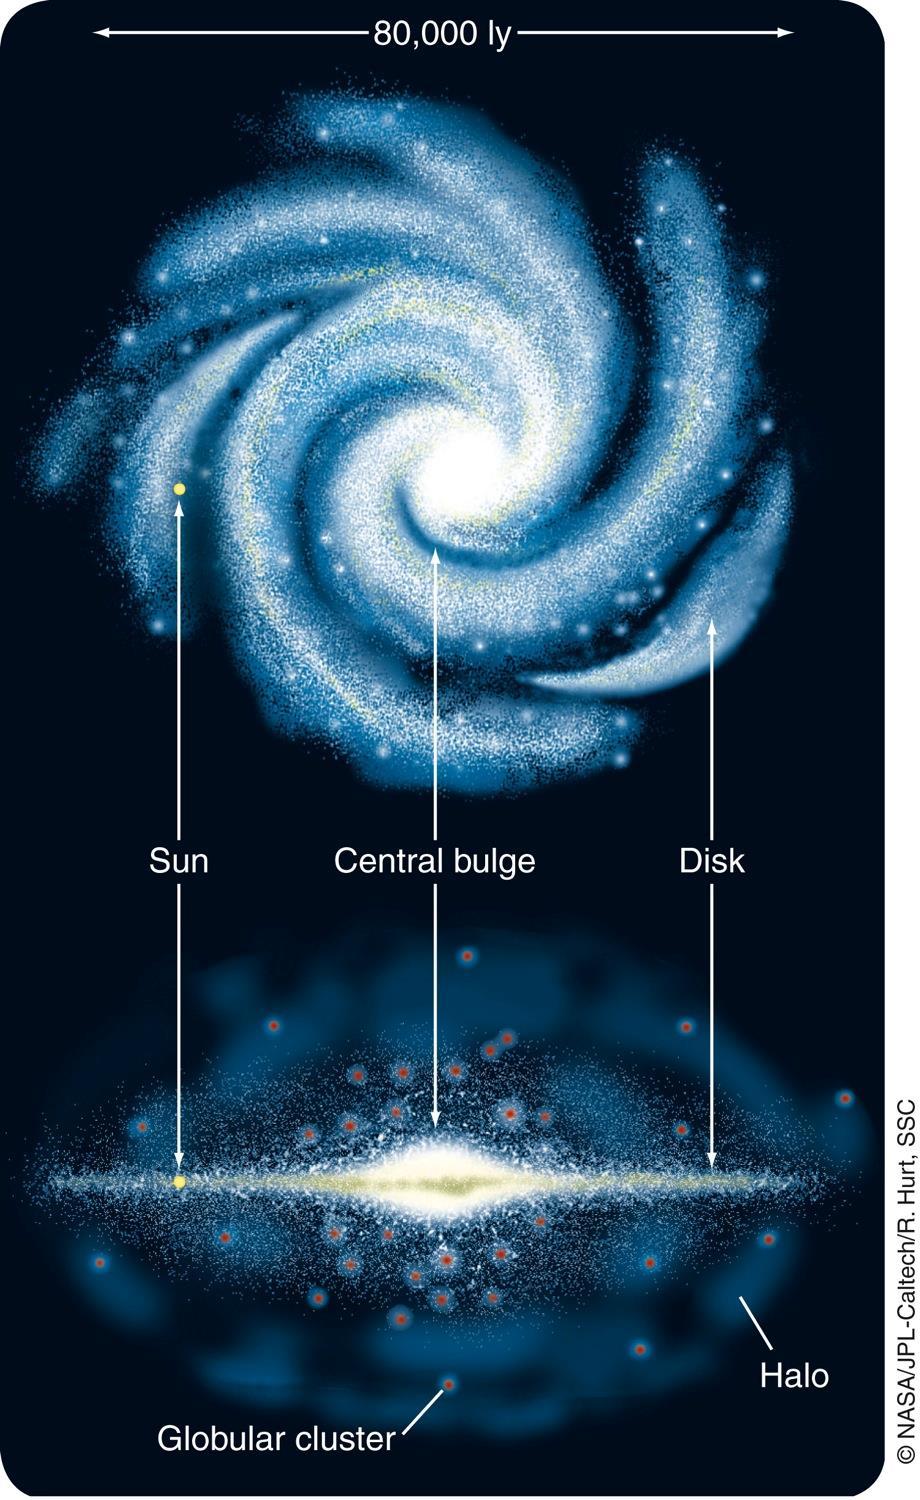 The visible disk of our galaxy is roughly 80,000 ly in diameter.